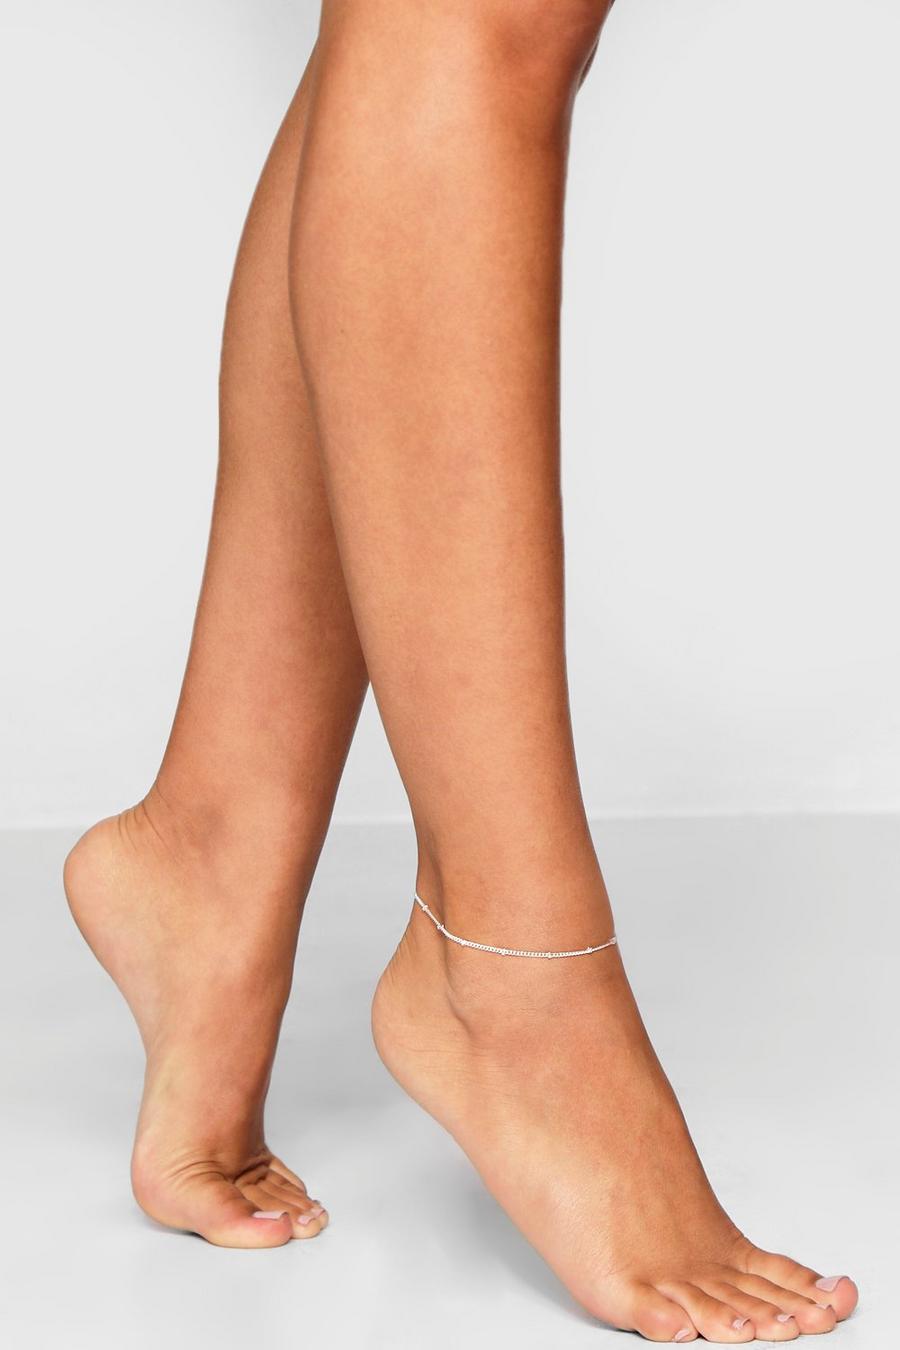 Silver argent Simple Chain Anklet